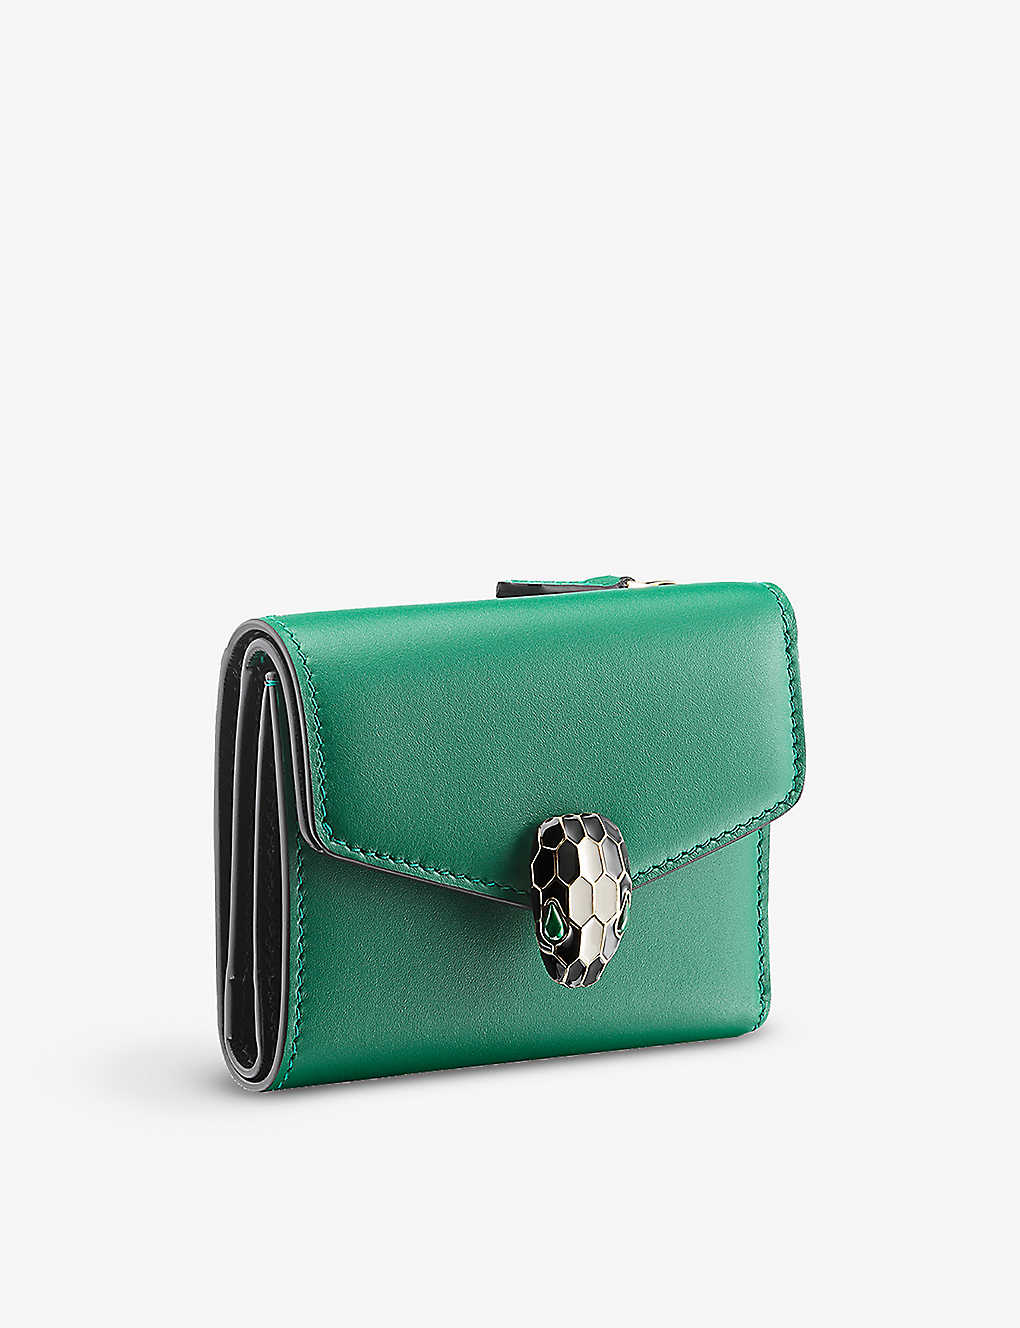 Bvlgari Serpenti Forever Compact Card Holder In Green